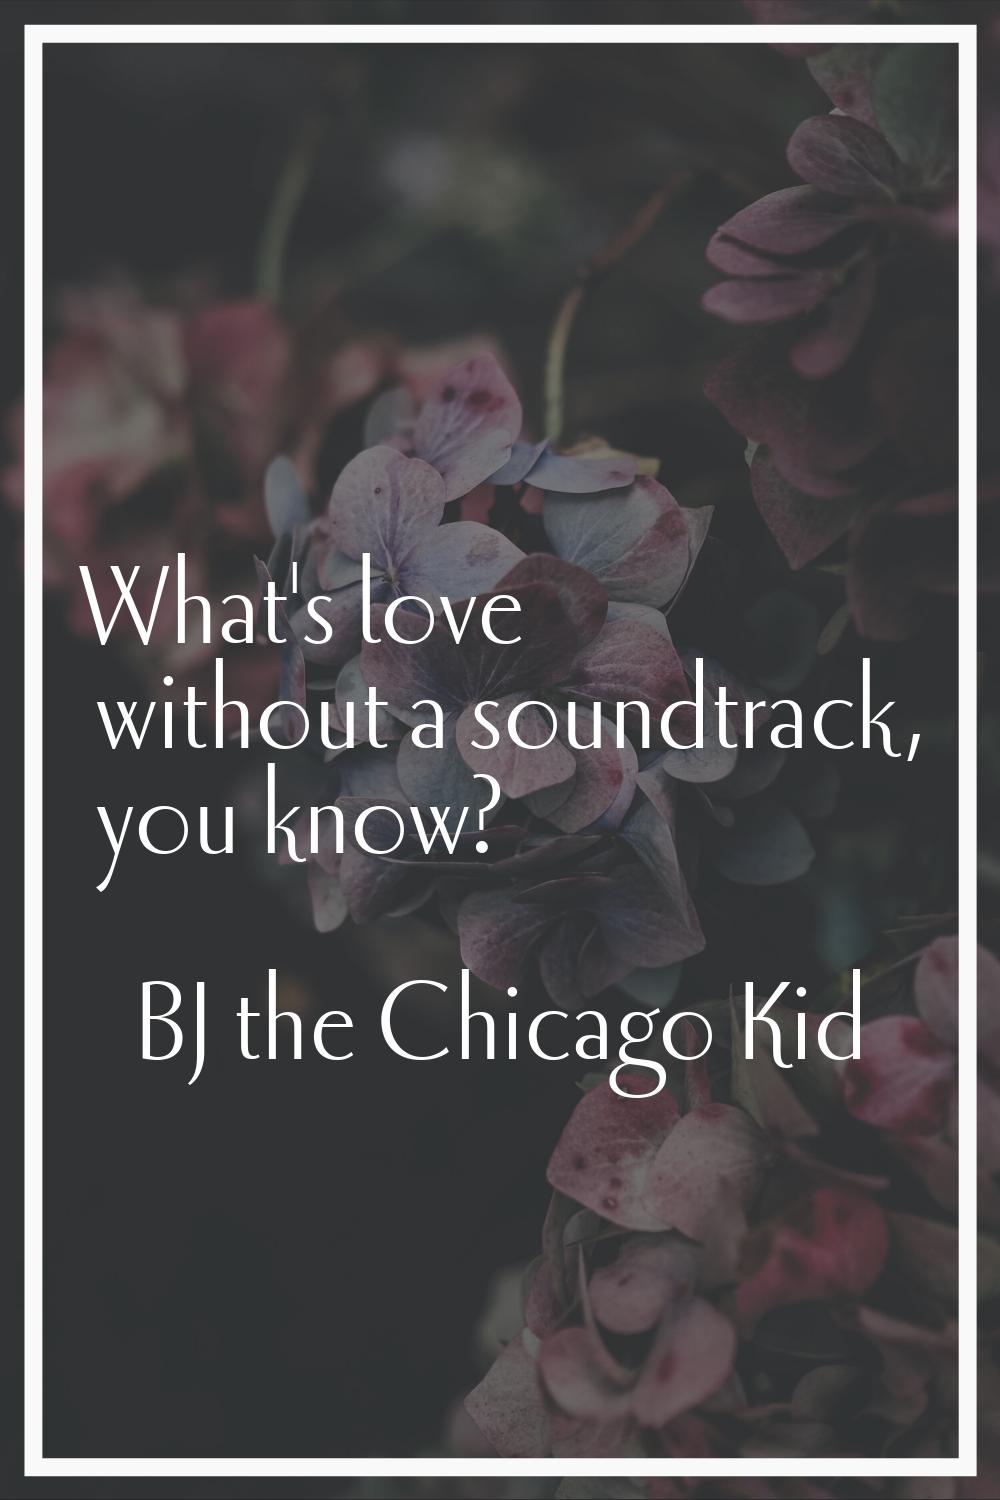 What's love without a soundtrack, you know?